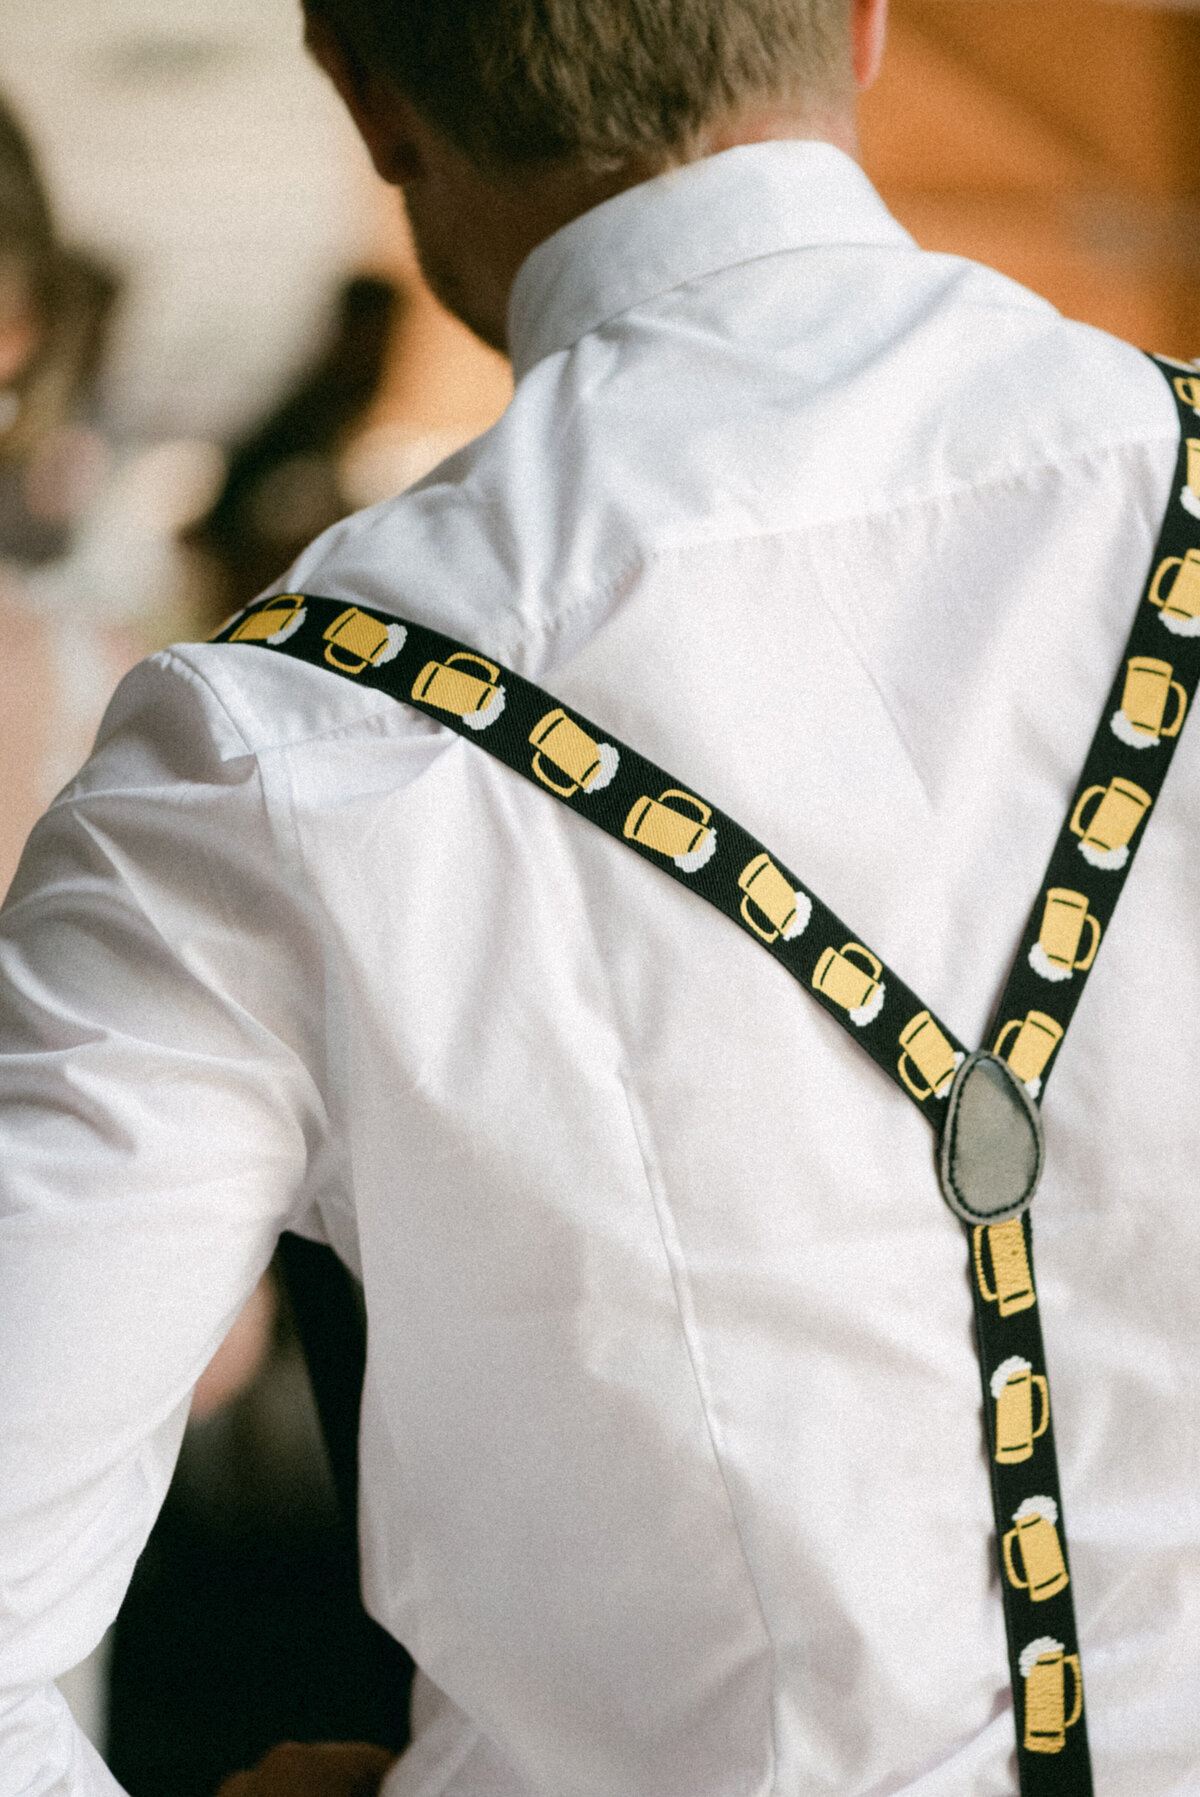 Funny suspenders in an image captured by wedding photographer Hannika Gabrielsson.